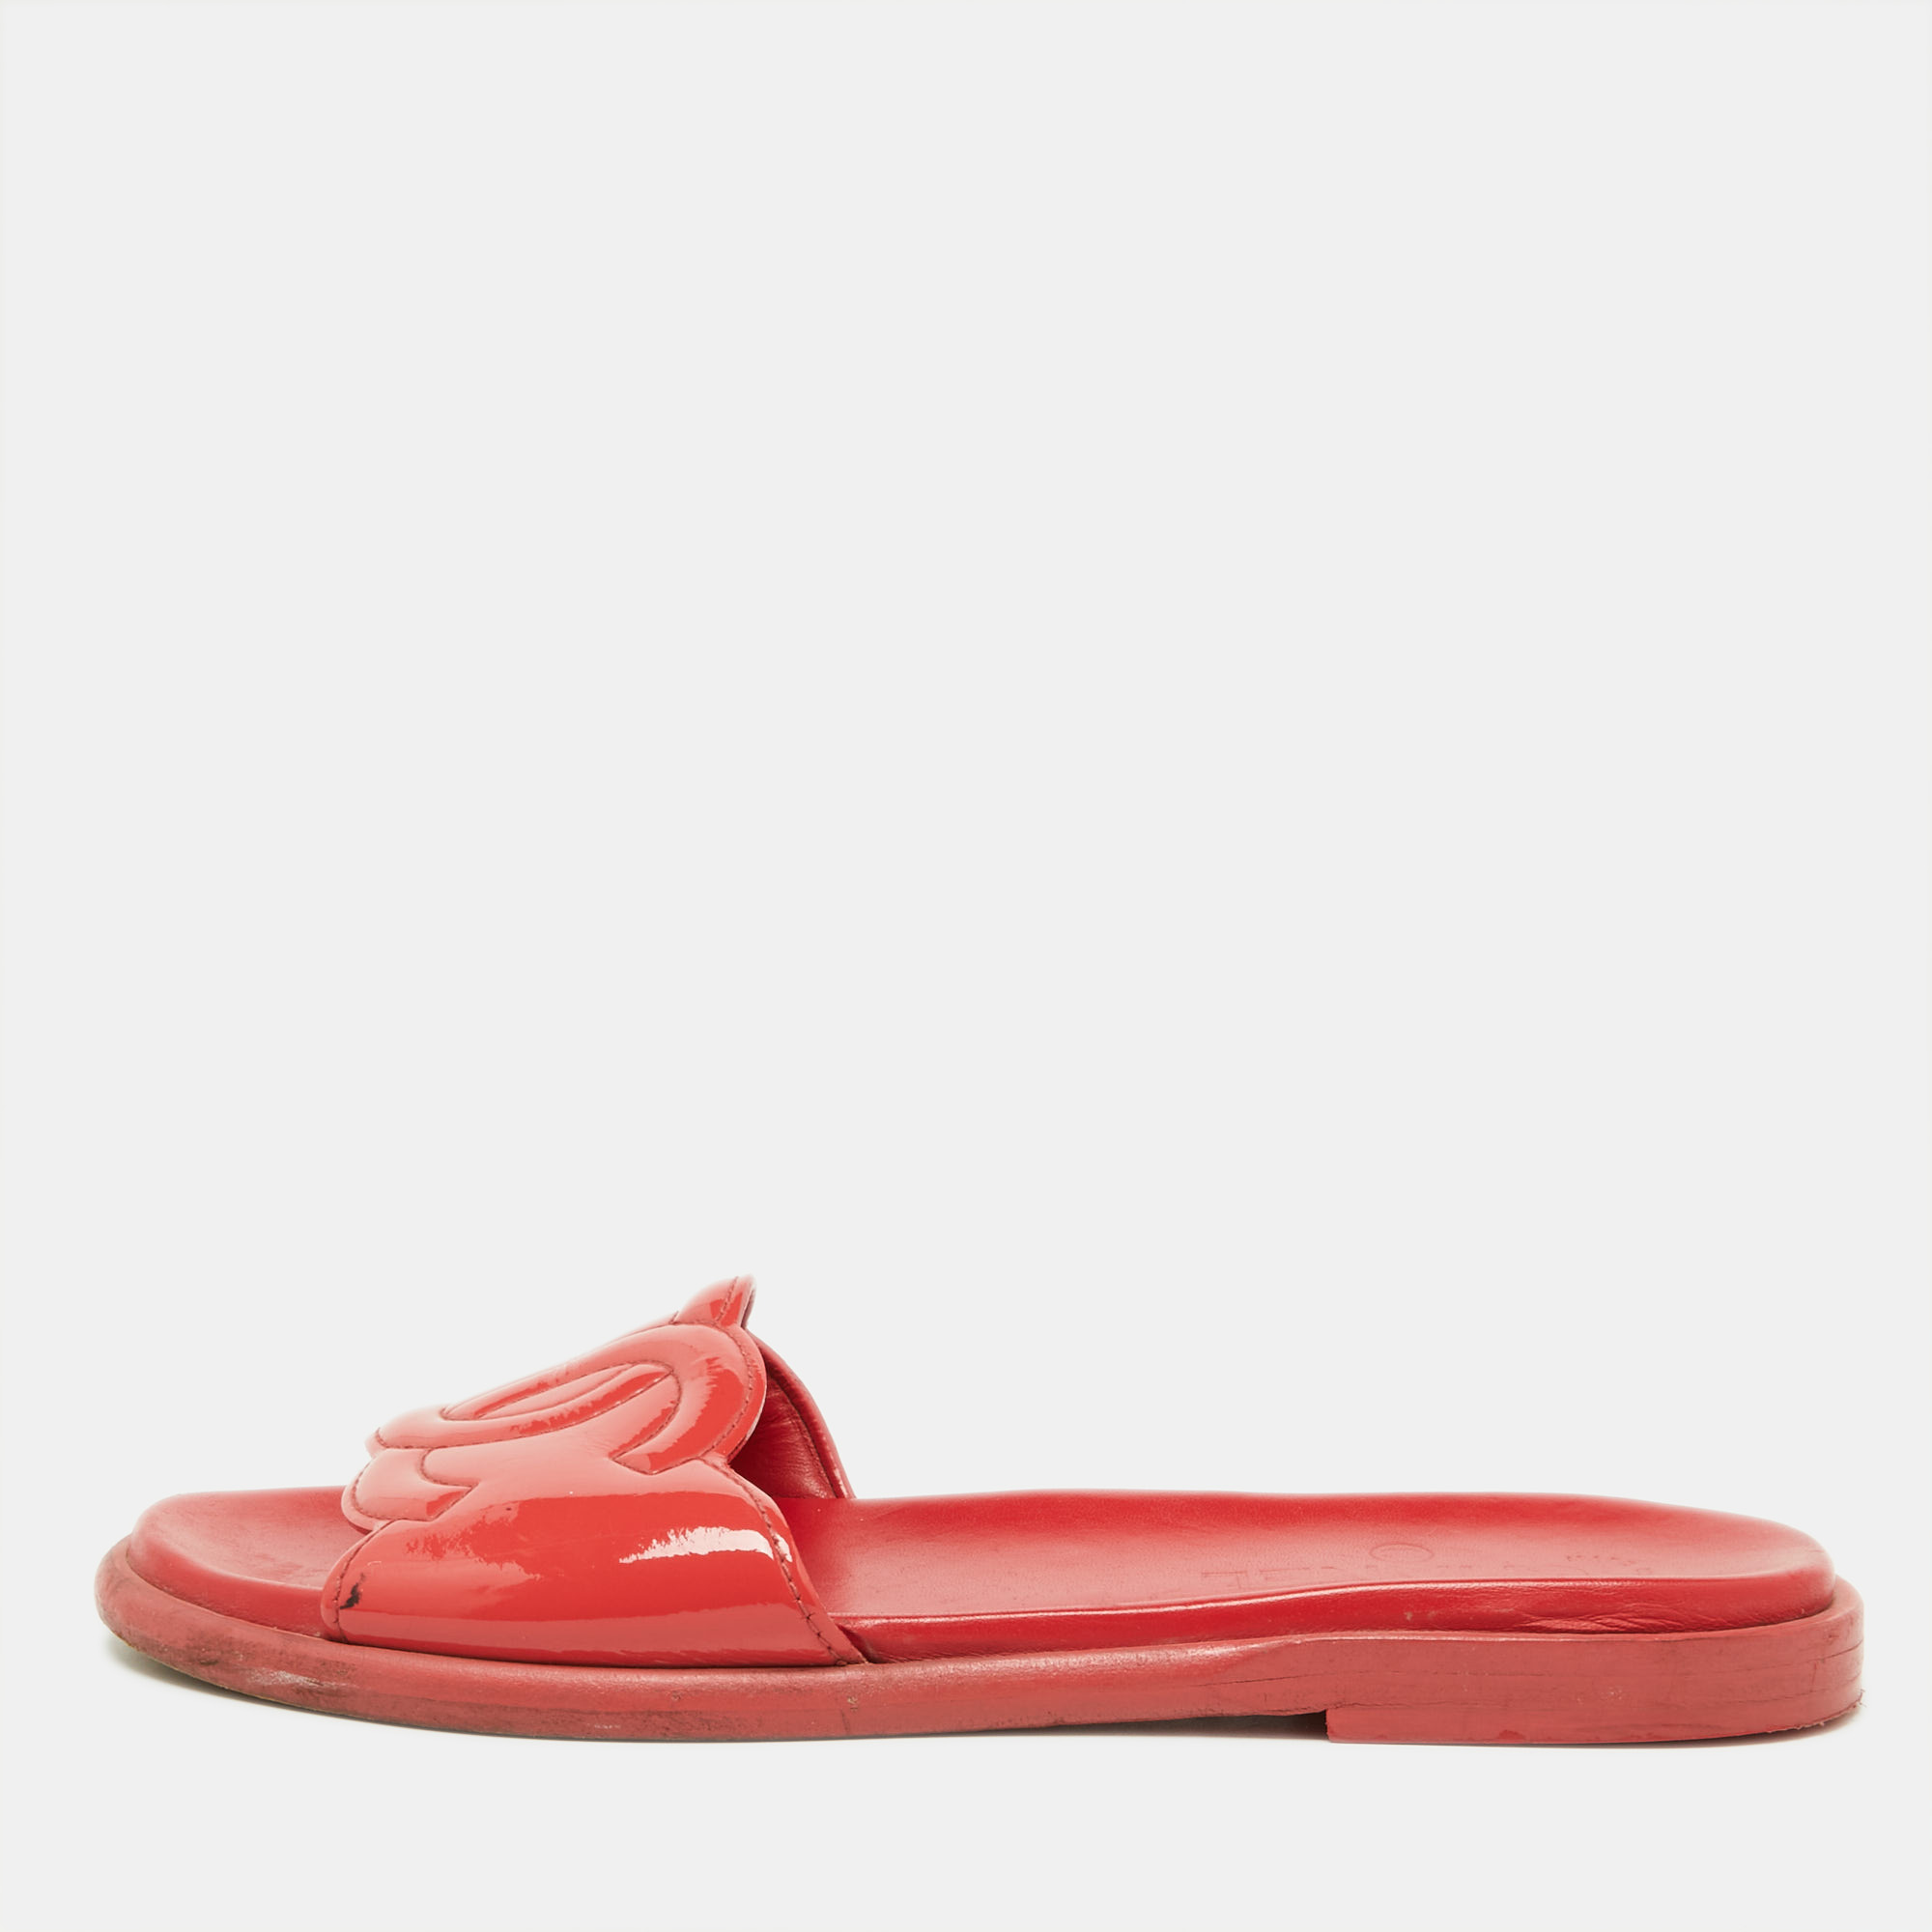 Chanel thong sandals leather - Gem